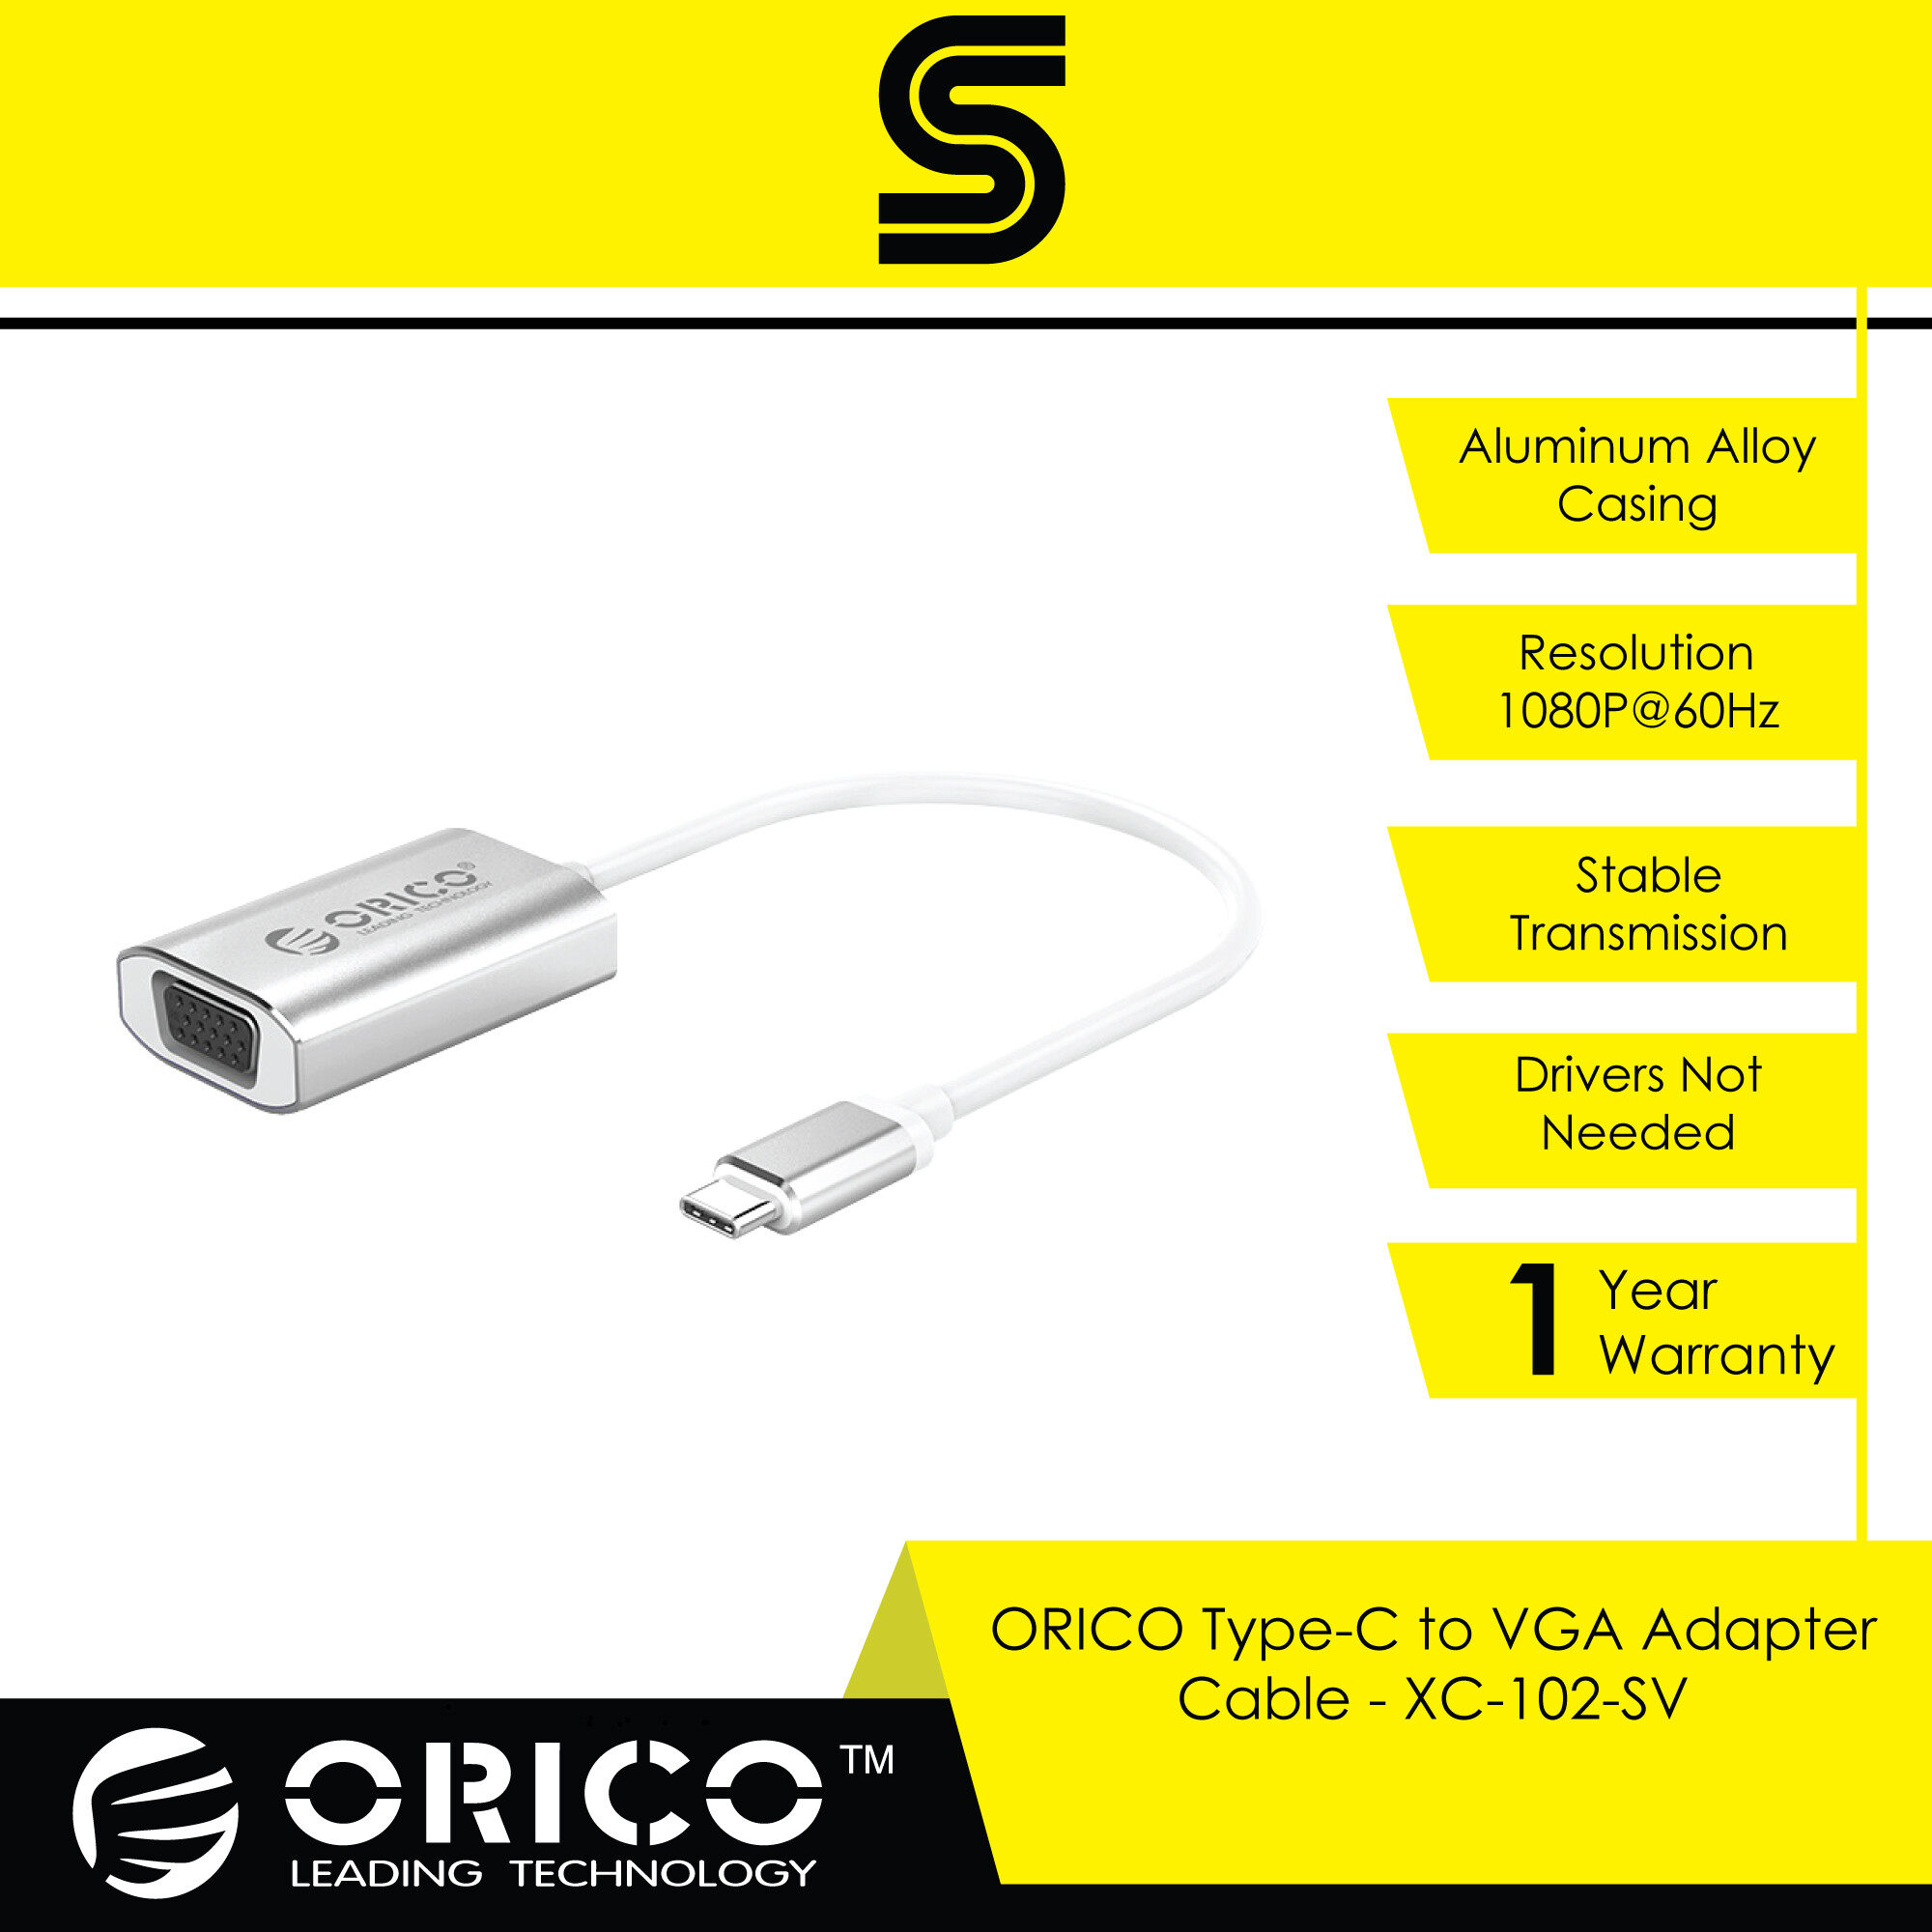 ORICO Type-C to VGA Adapter Cable - XC-102-SV